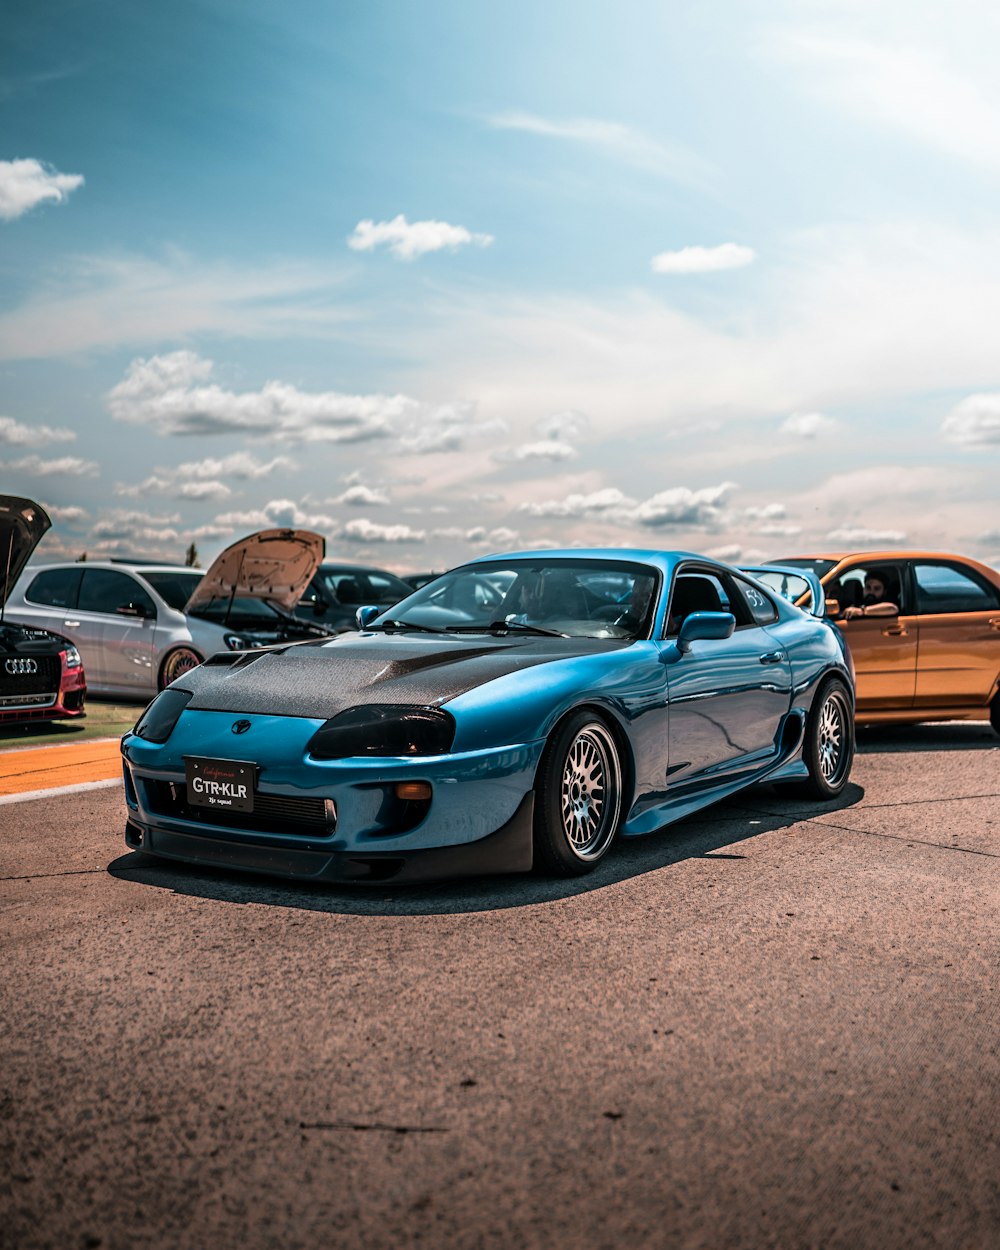 Car Tuning Pictures  Download Free Images on Unsplash